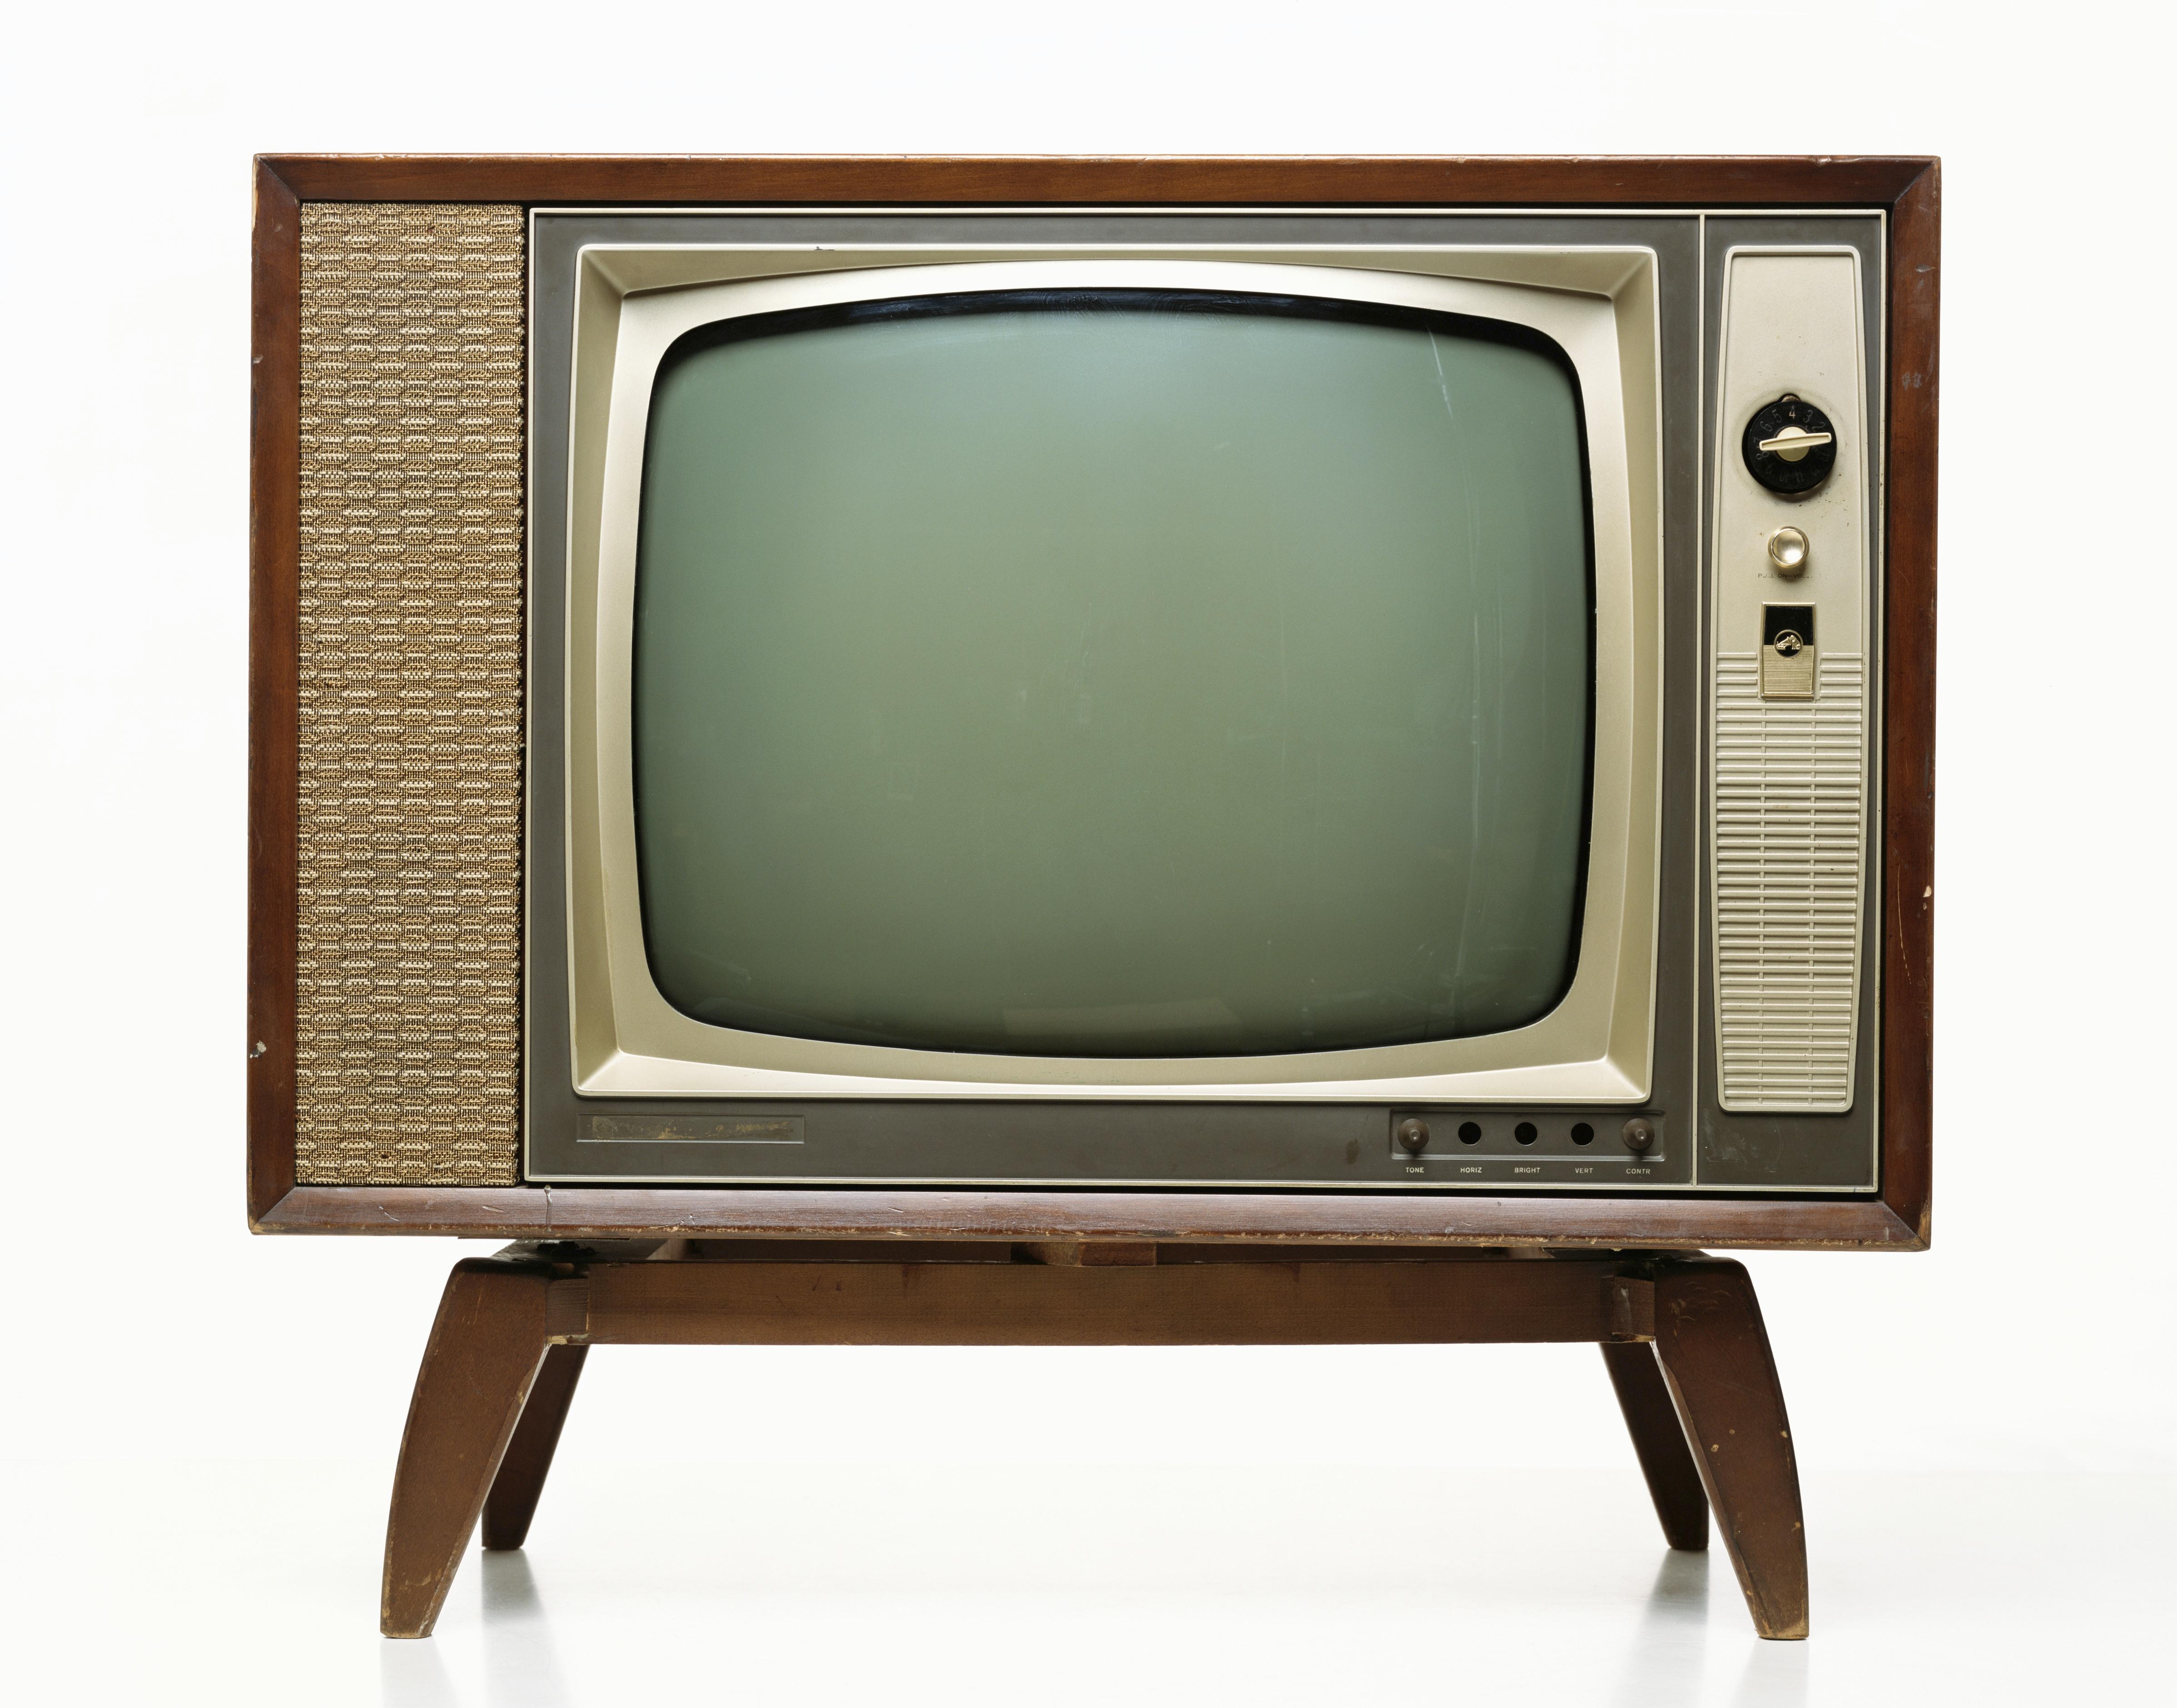 Television set on stand | PBS LearningMedia